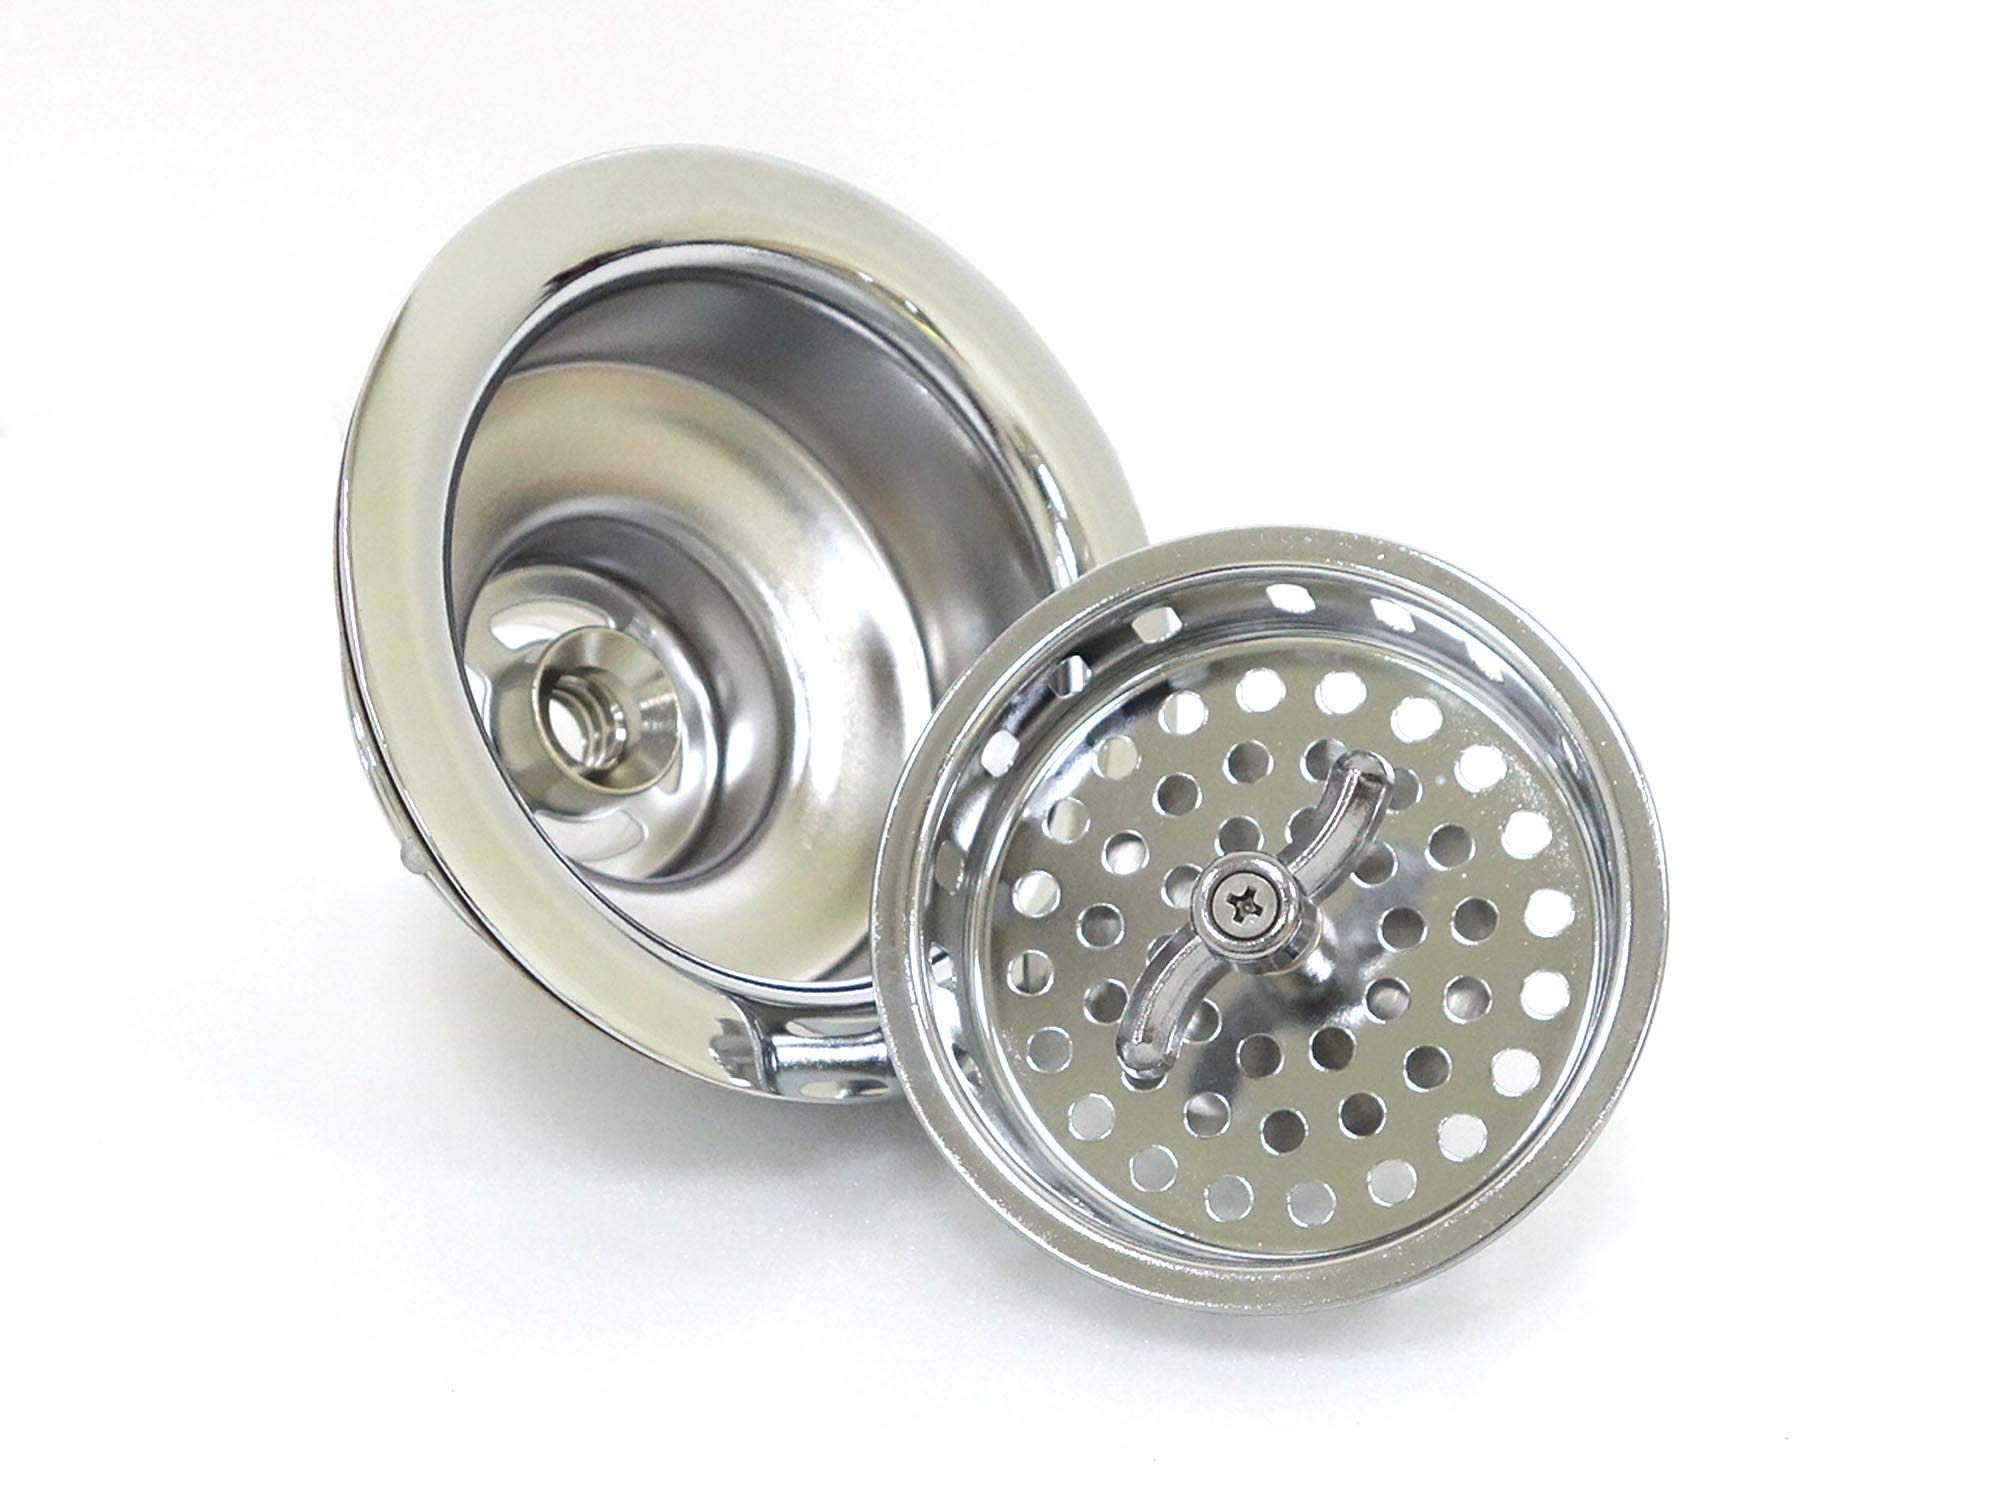 Twist Lock Basket Strainer Replacement (Premium 304 Stainless Steel Construction) for 3-1/2" Spin and Seal Drains W/Threaded Stopper Function-VARNAHOME